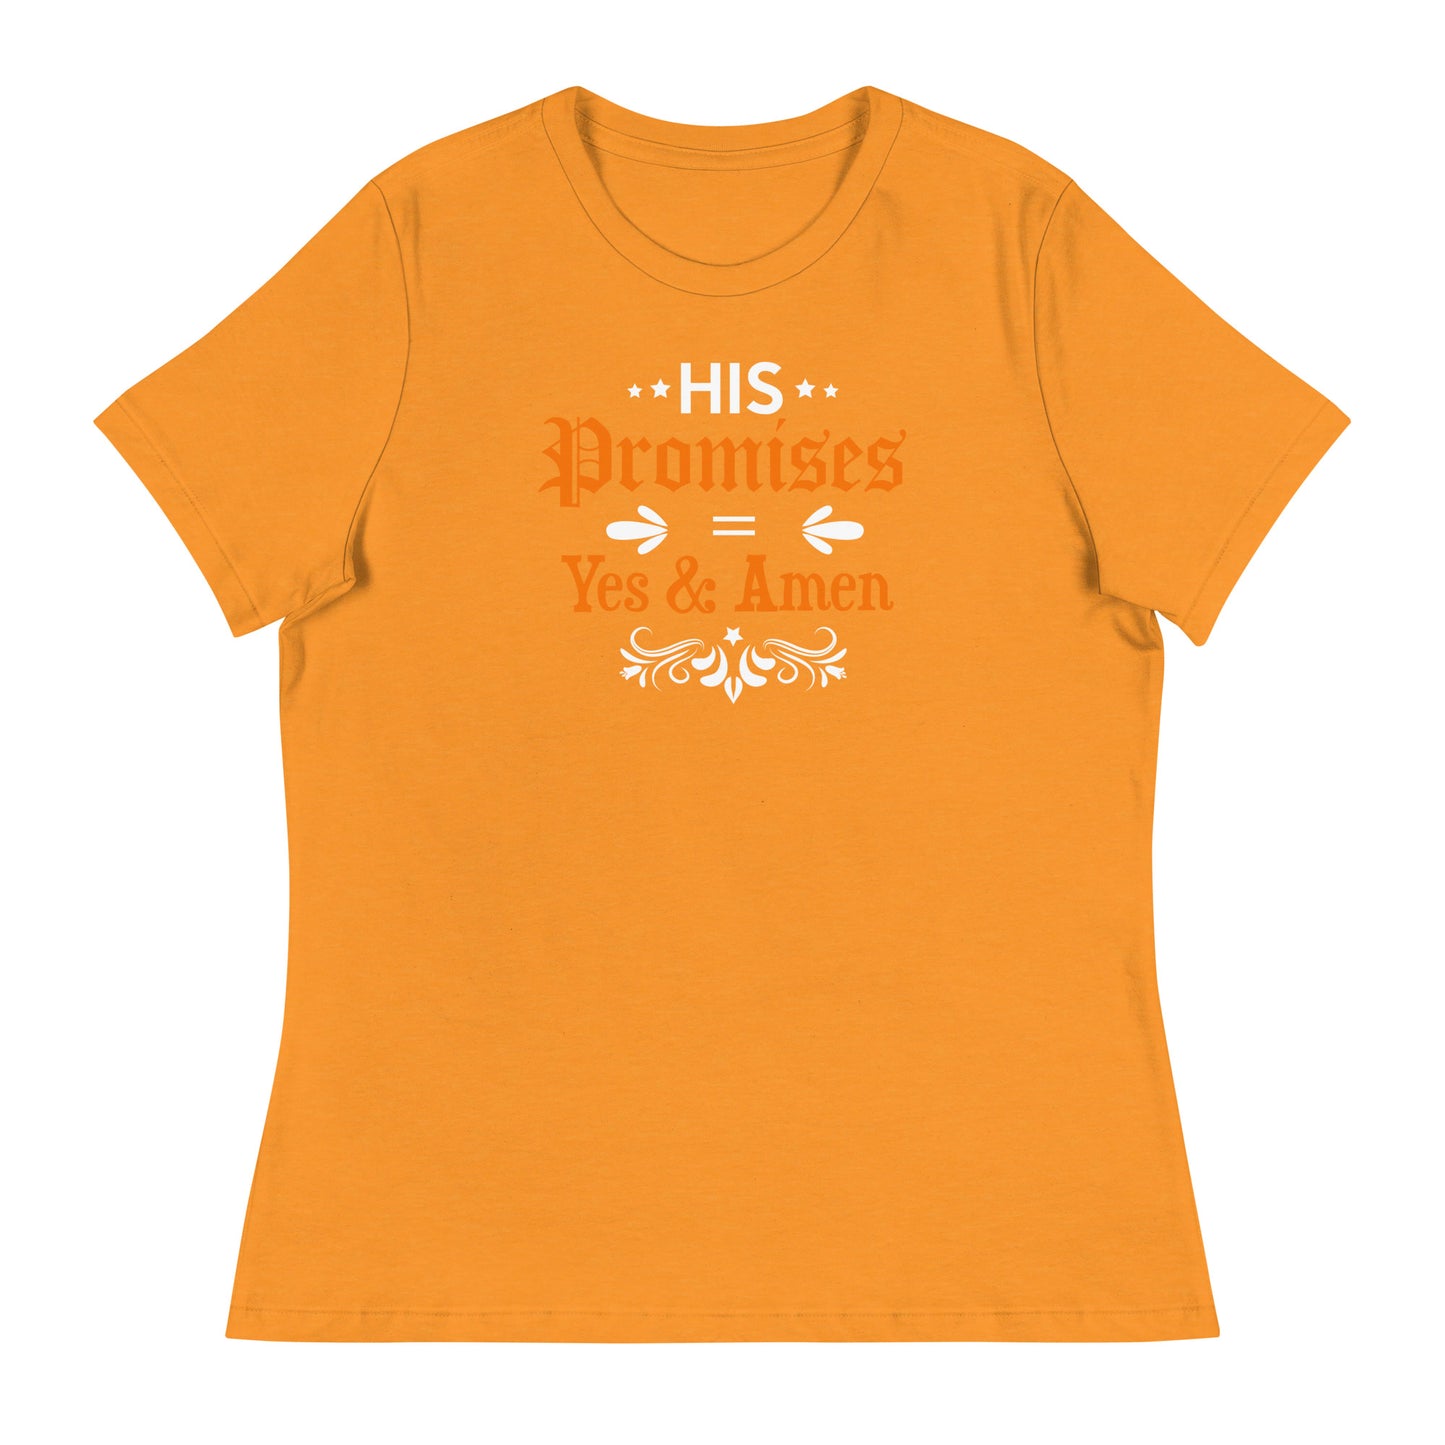 His Promises - Women's Relaxed T-Shirt